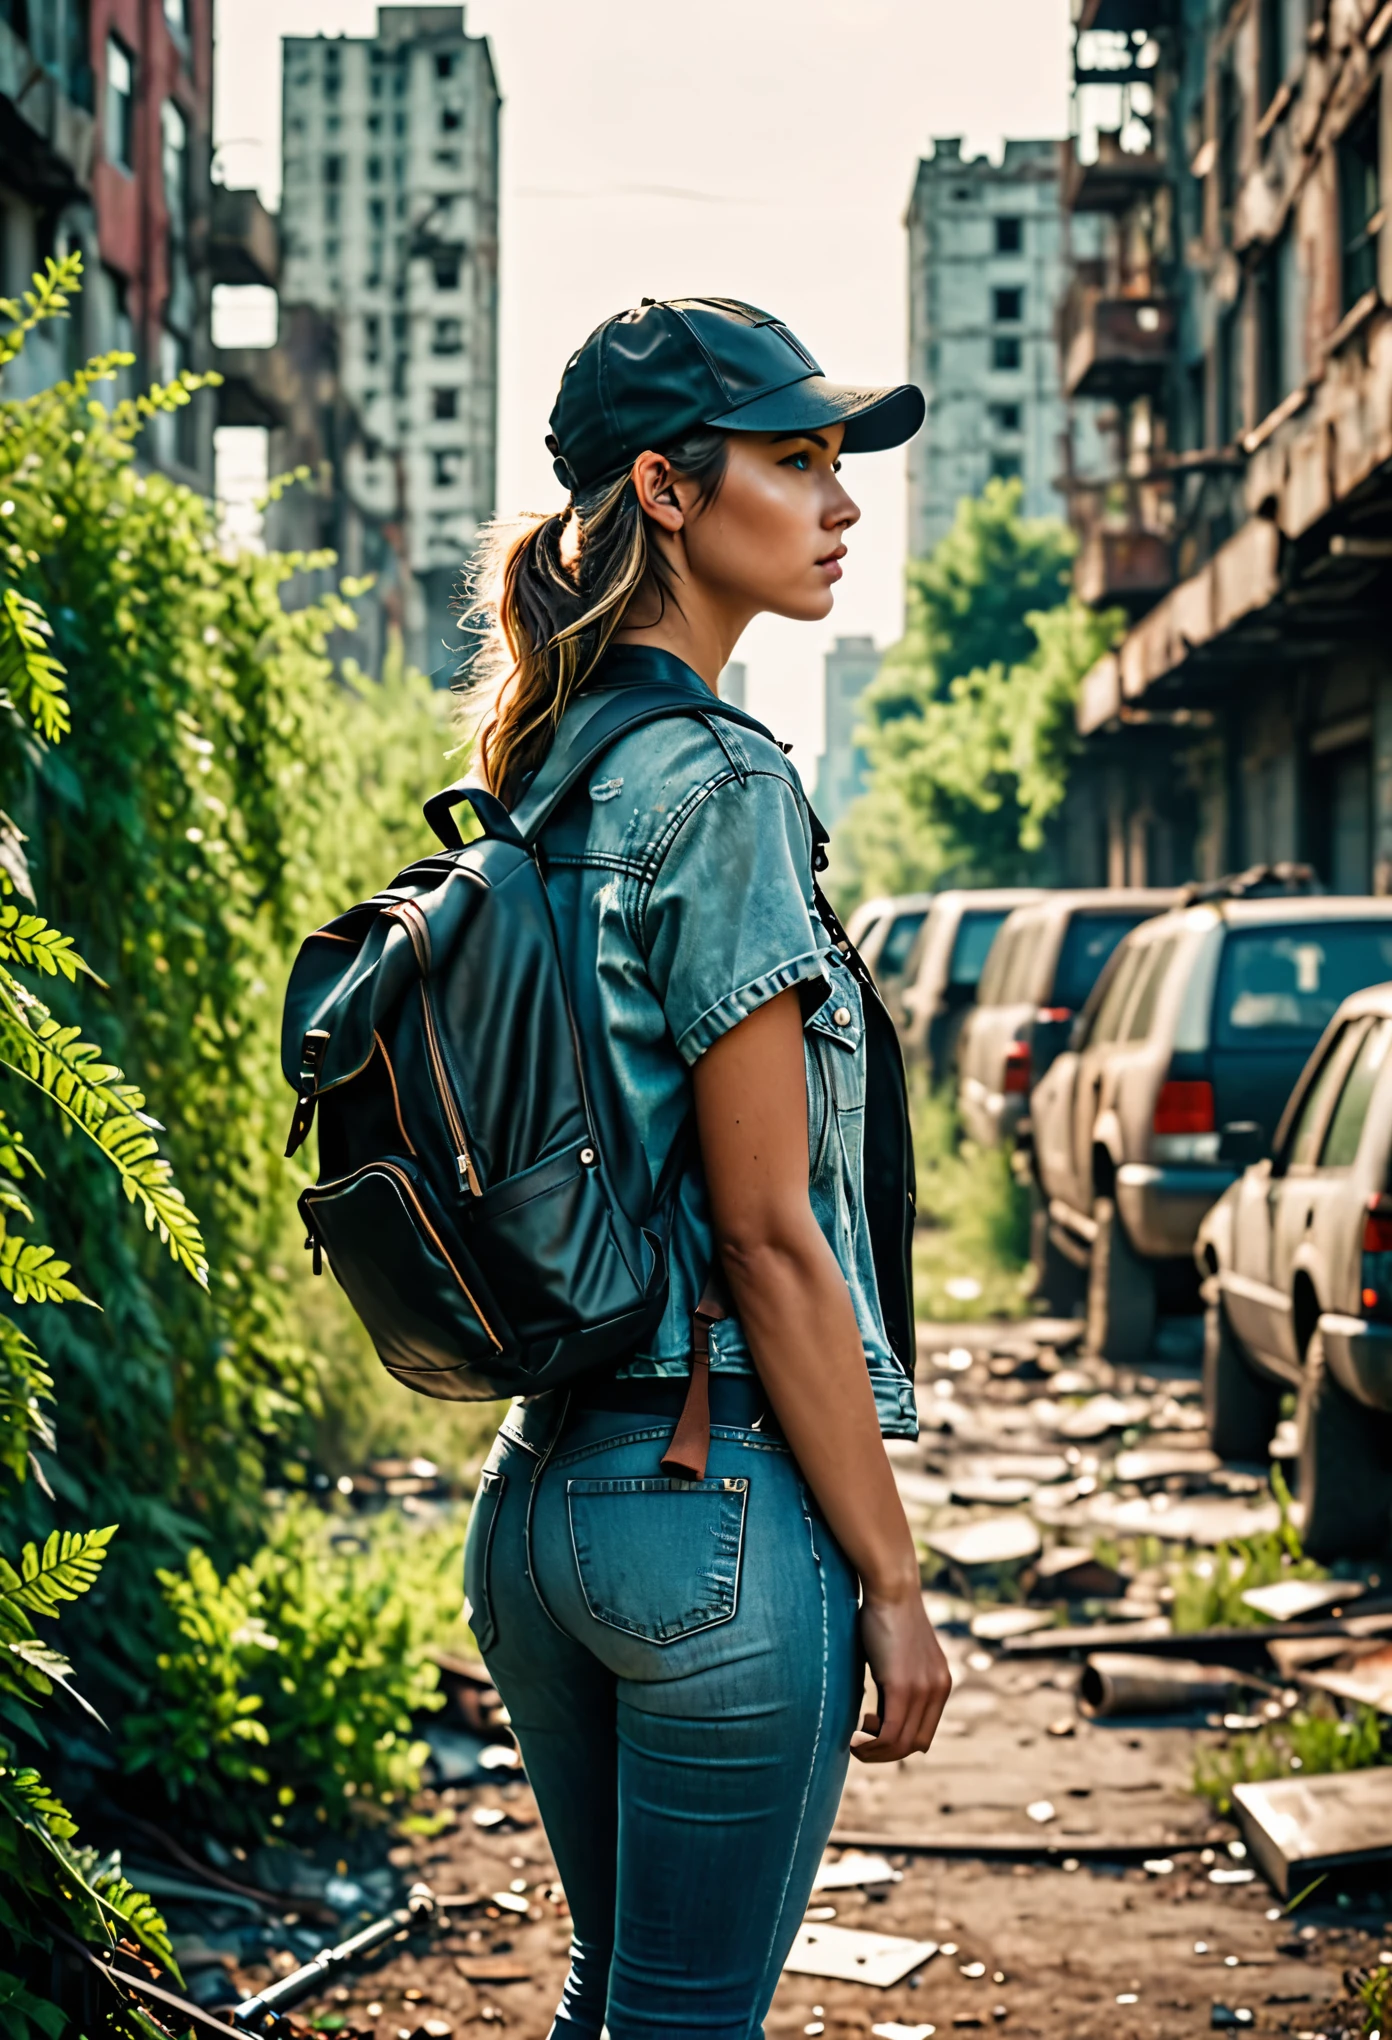 realistic photo, realistic post-apocalyptic world, an abandoned city overgrown with greenery, blocks and skyscrapers, old junk cars covered with bushes,, full silhouette from behind,, a woman walking down the street, looking around with curiosity, holding a rifle at the ready, wearing tight jeans, a leather jacket and knee-high boots, The woman has a backpack on her back and a baseball cap on her head, she turns her head to the side so that her face is visible, she has no makeup,, woman is little muscular,, Nikon d8, film grain, bokeh, perfect light, shadows, detailed face and body, immersive background,